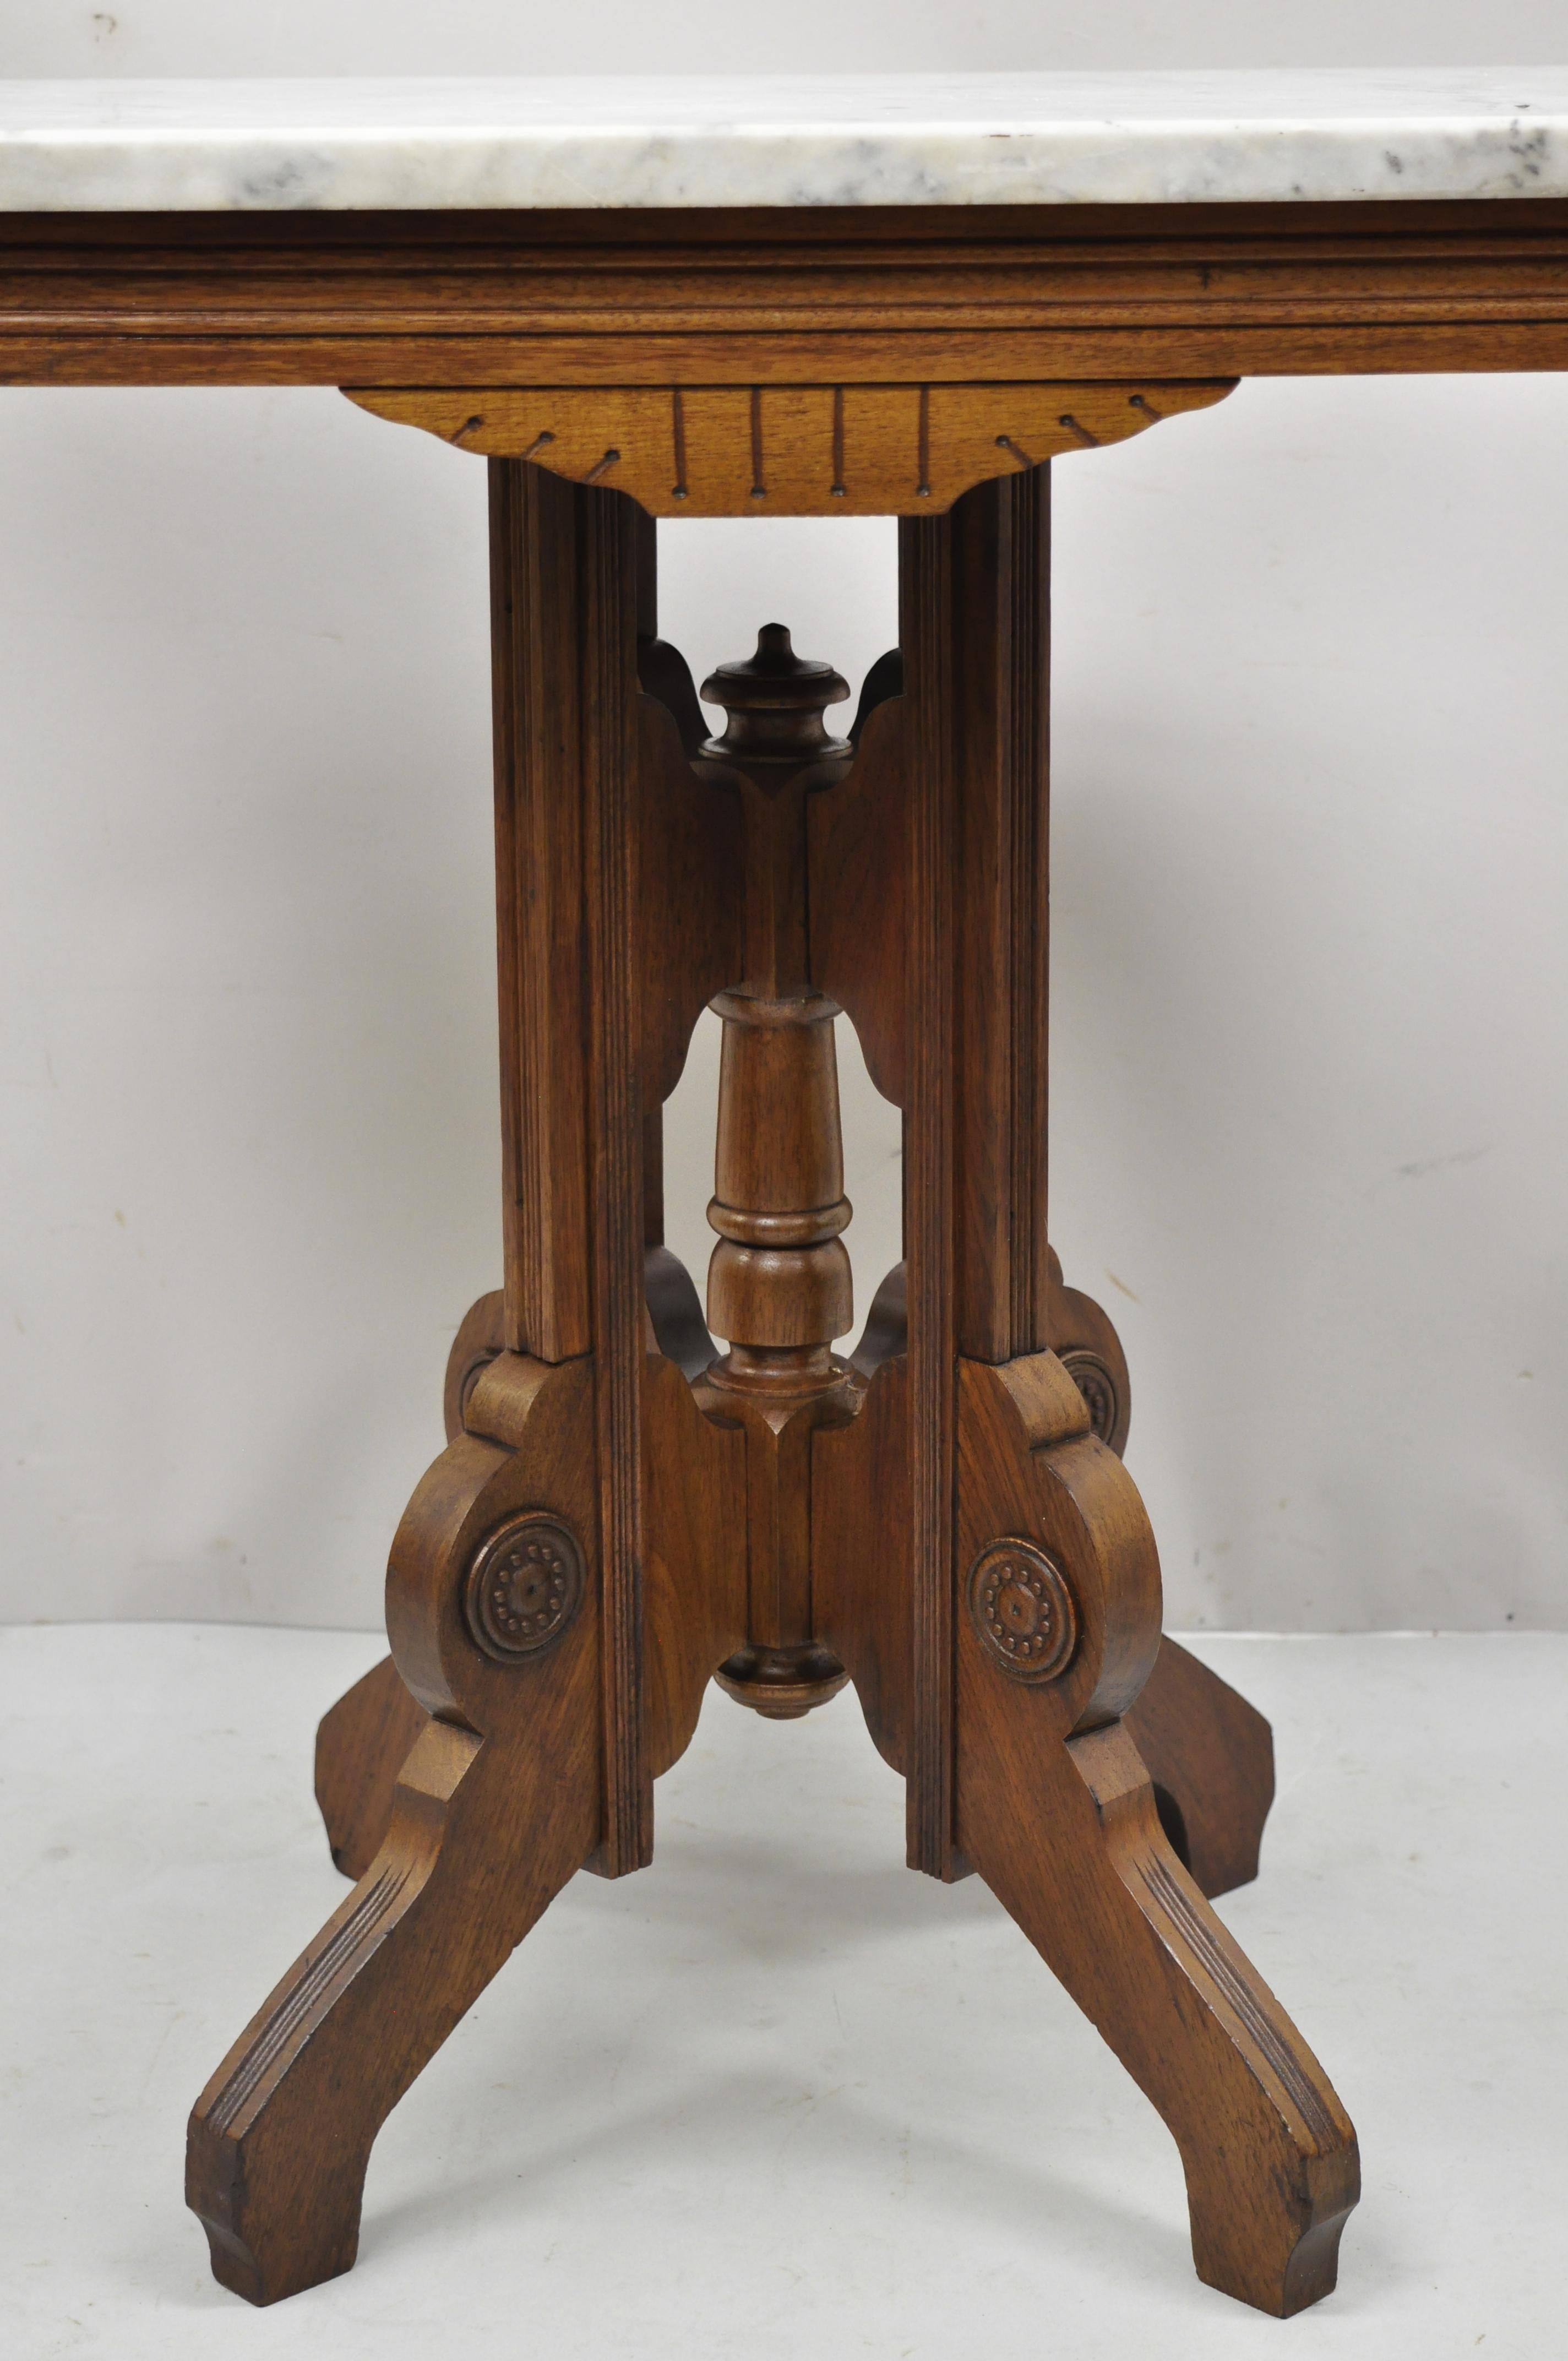 Antique Eastlake Victorian walnut marble top parlor lamp side table. Item features carved walnut pedestal base, marble top, very nice antique item, great style and form. Circa 1900s. Measurements: 28